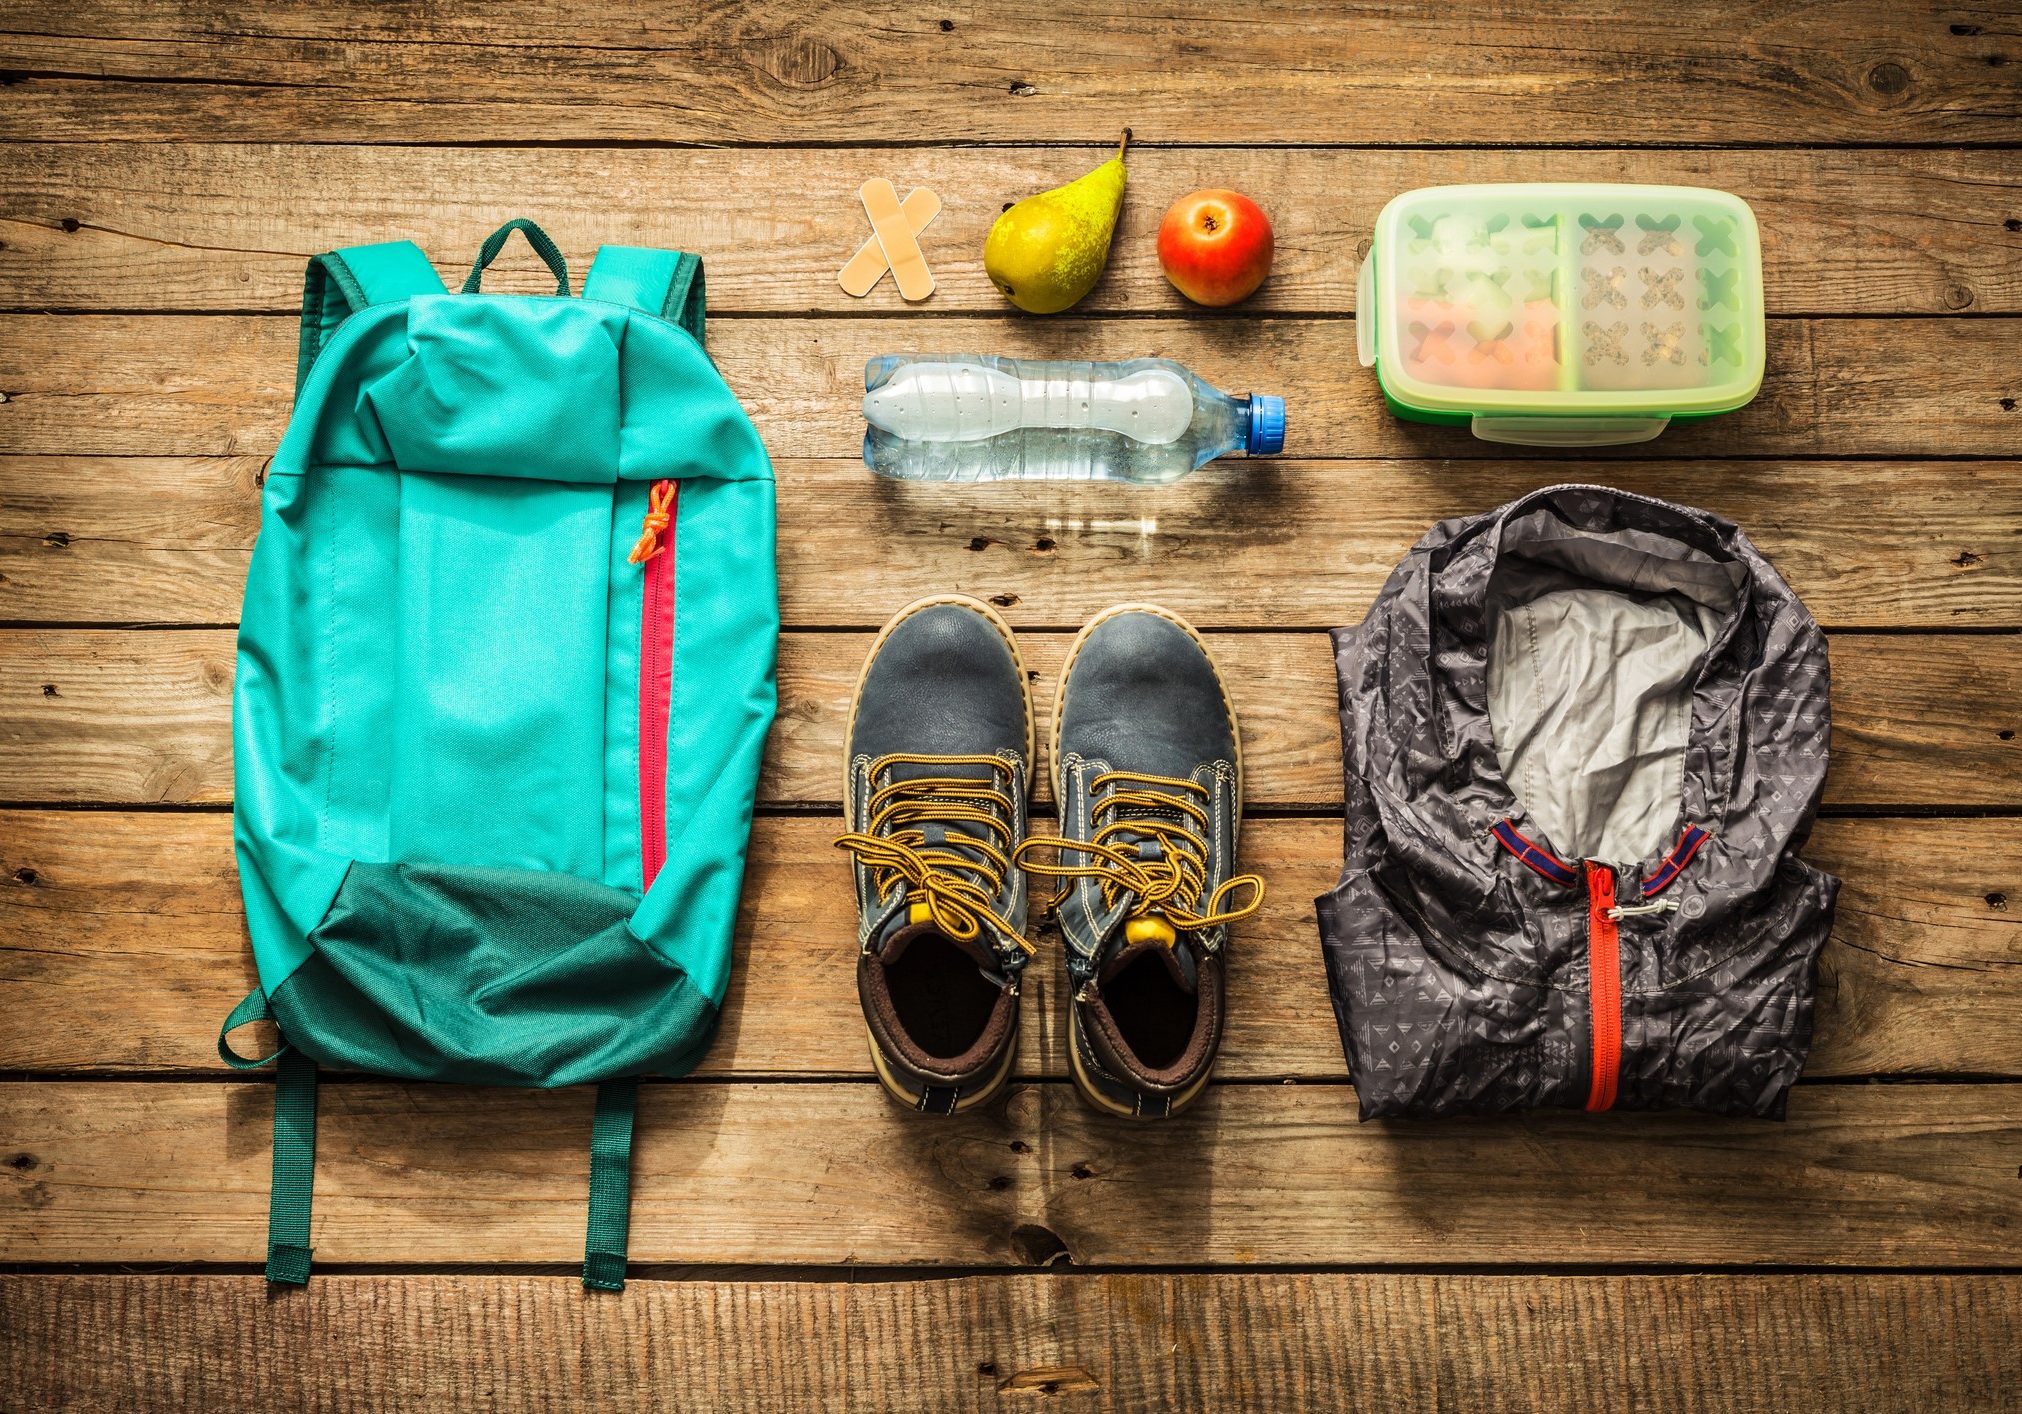 Traveling - packing (preparing) for adventure school trip concept. Backpack, boots, jacket, lunch box, water and fruits on wooden background captured from above (flat lay).